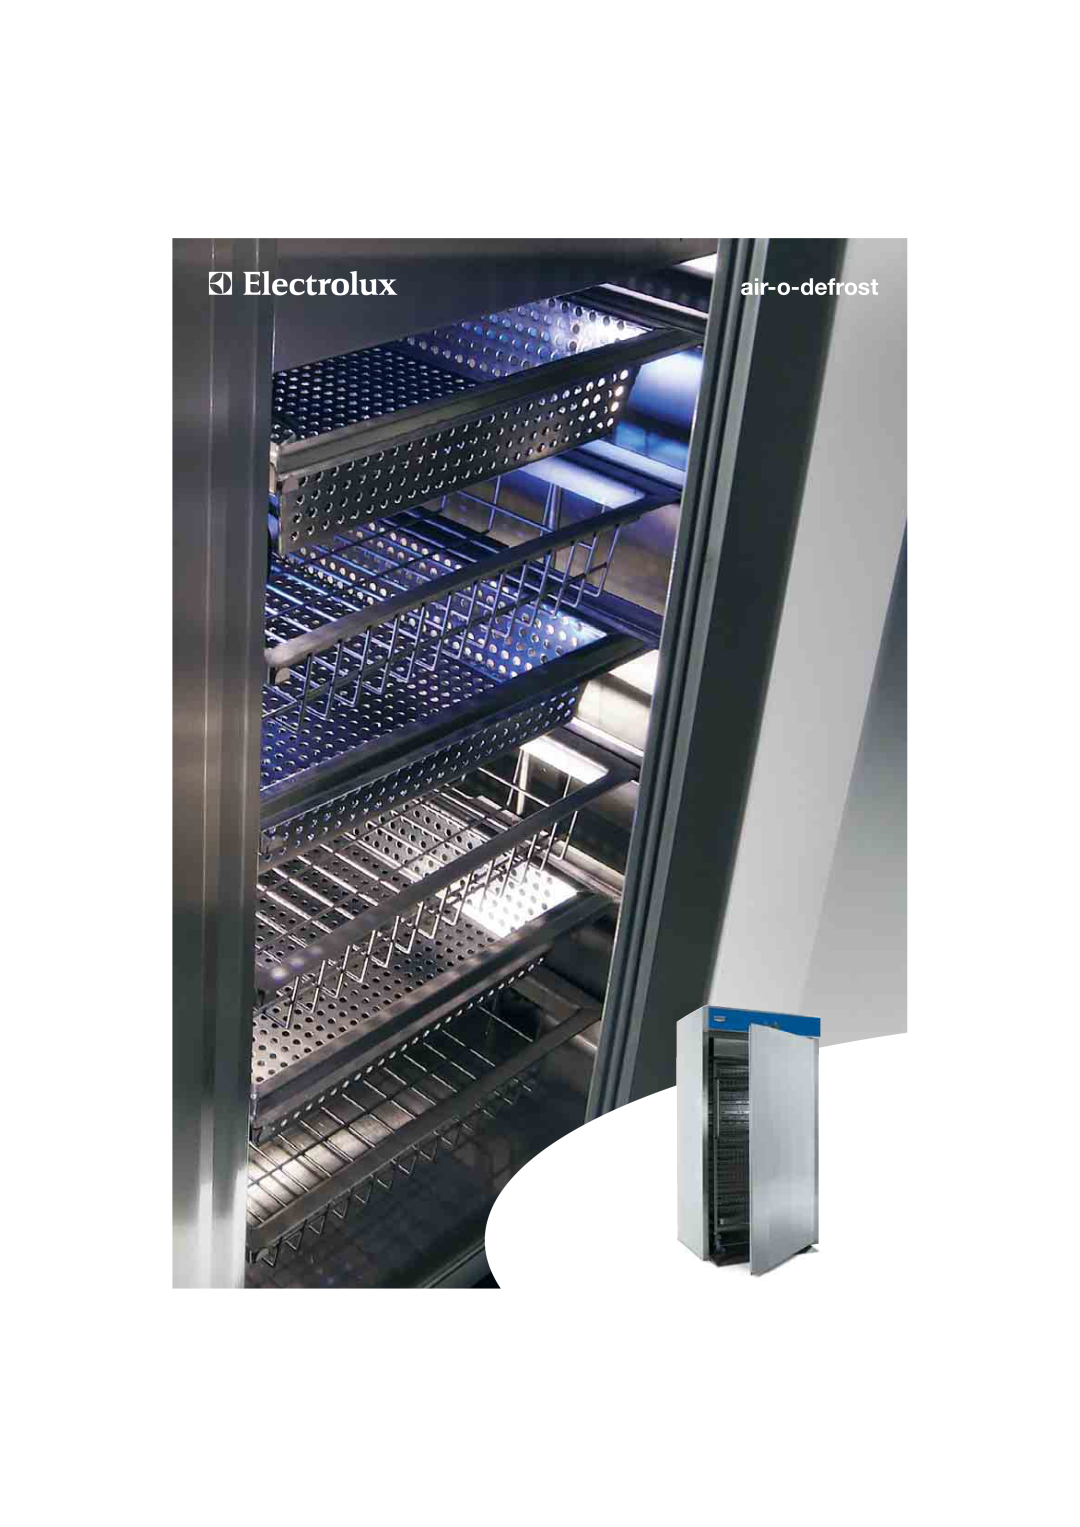 Electrolux 725001 manual air-o-defrost 